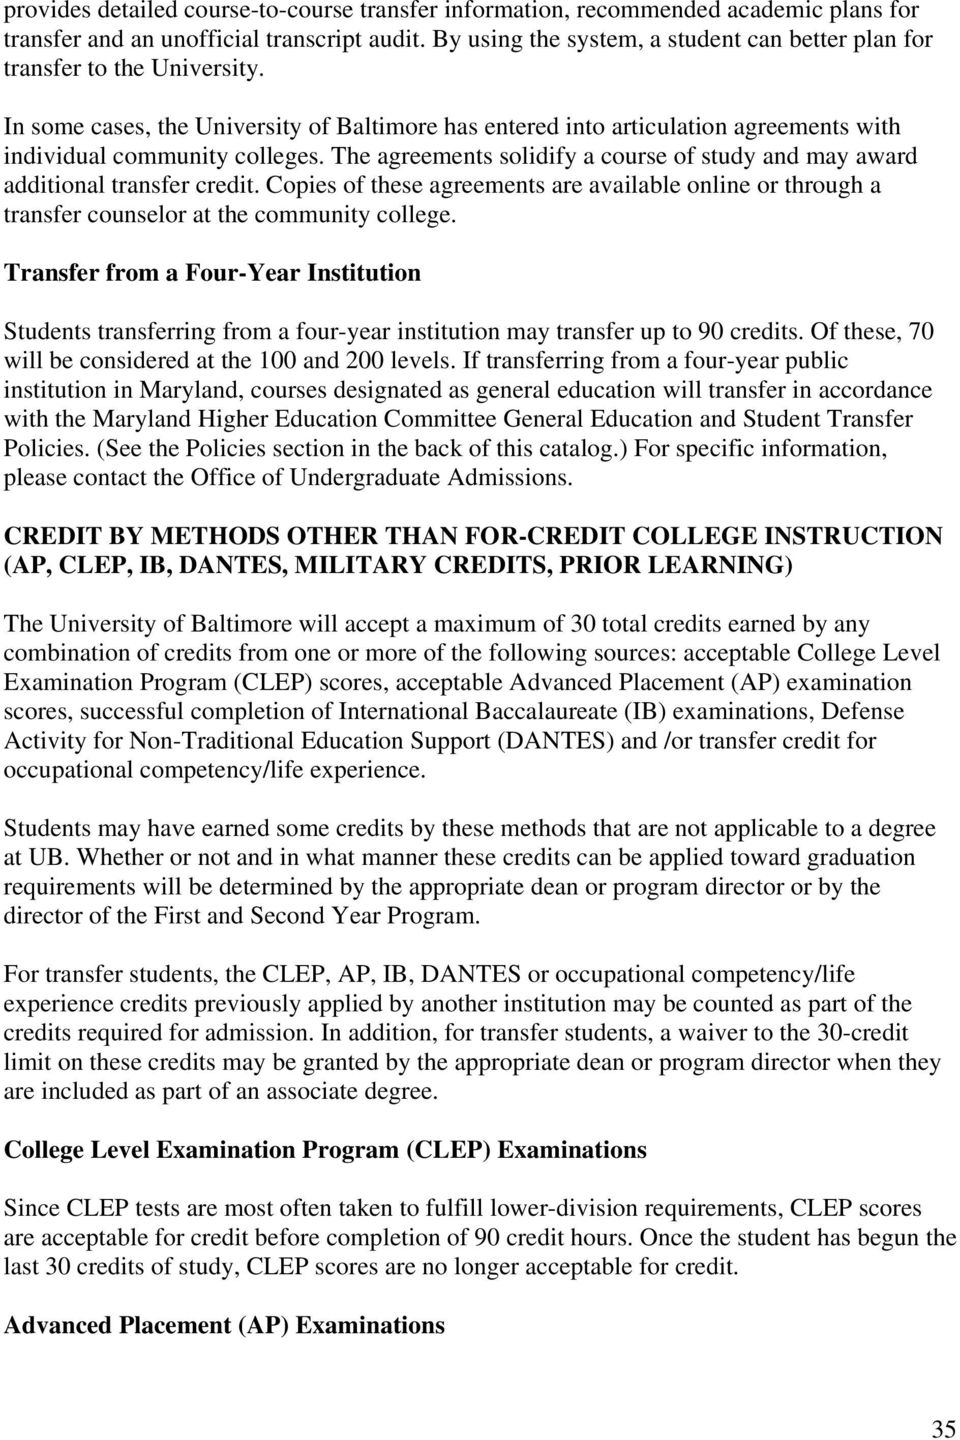 The agreements solidify a course of study and may award additional transfer credit. Copies of these agreements are available online or through a transfer counselor at the community college.